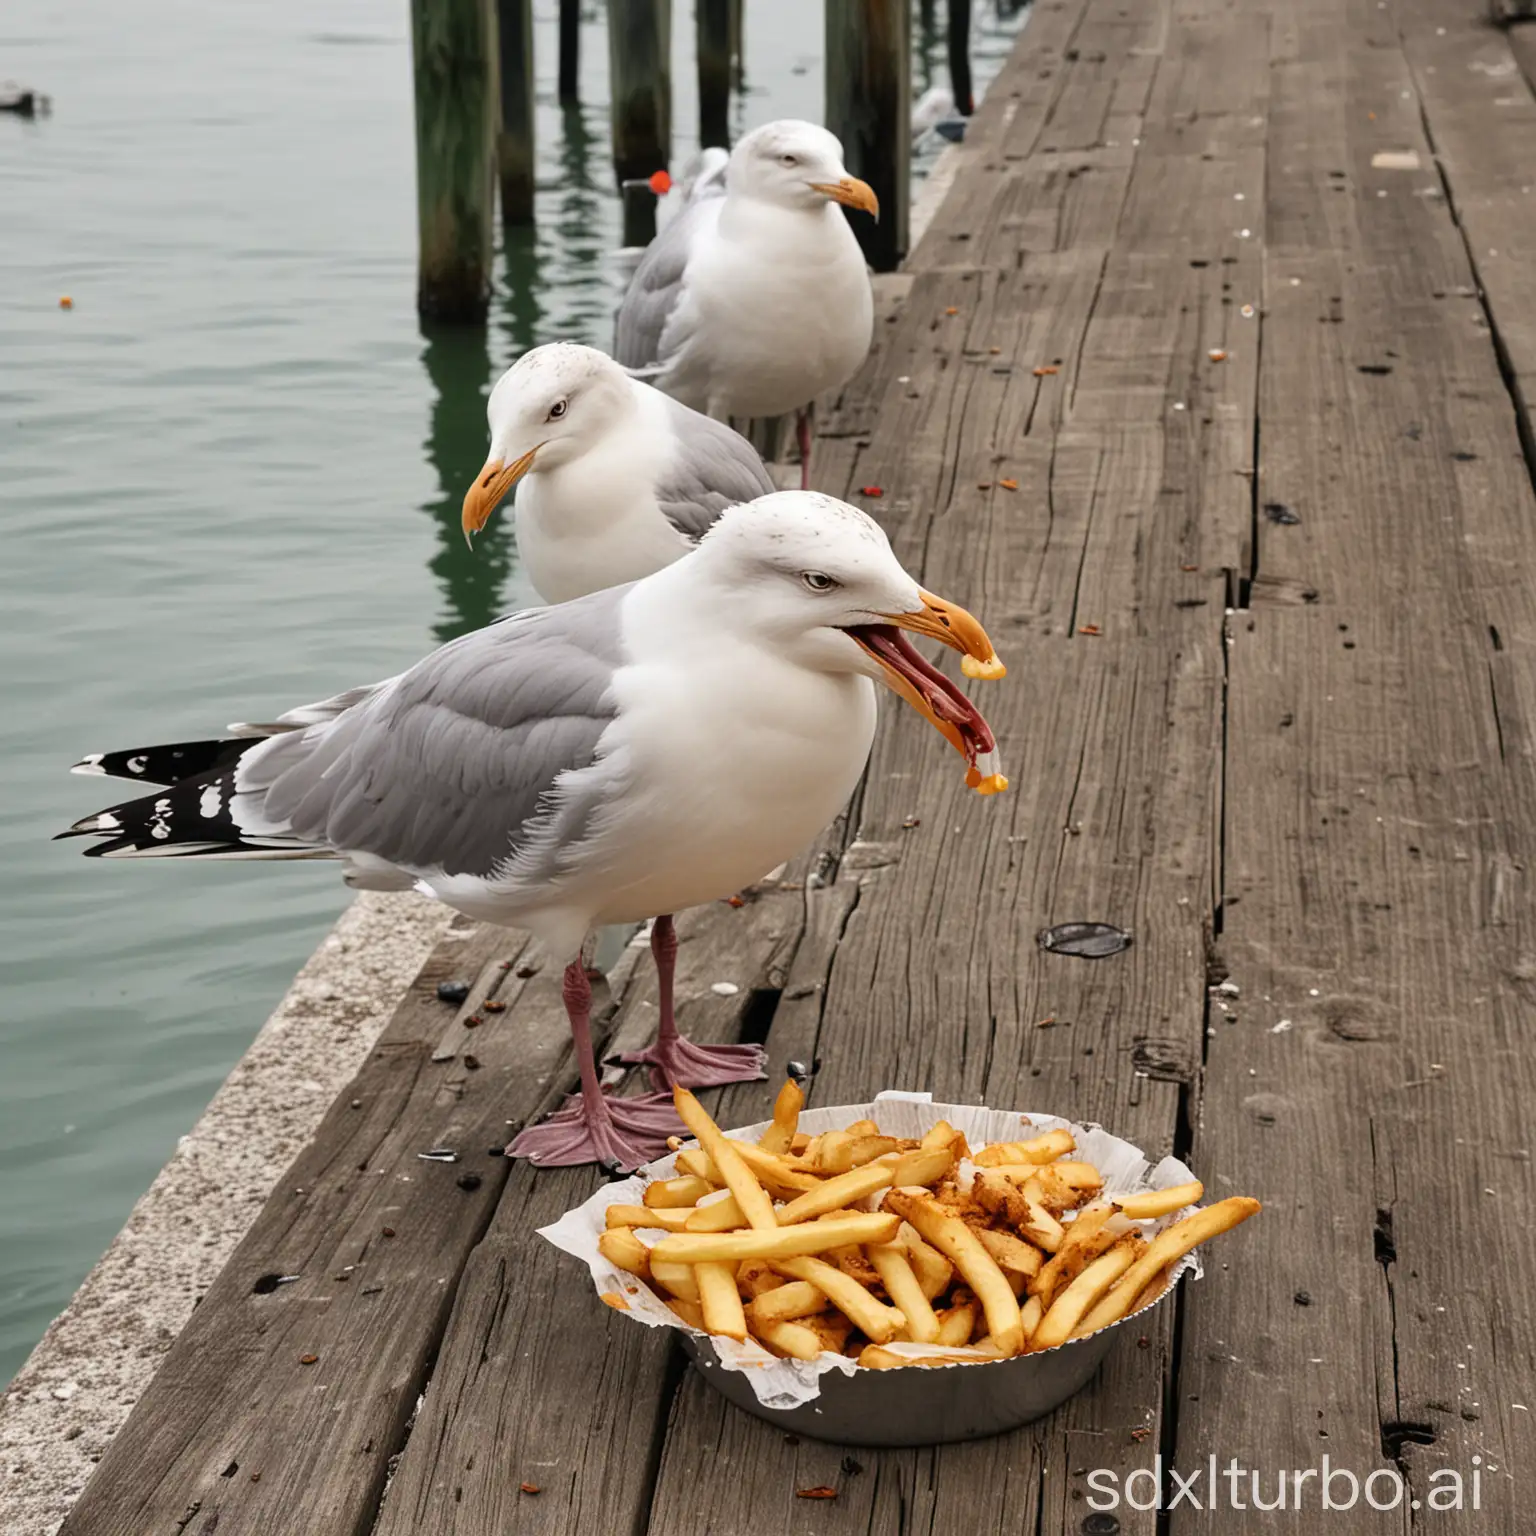 Seagulls-Eating-Fries-at-the-Pier-Coastal-Birds-Feeding-on-Chips